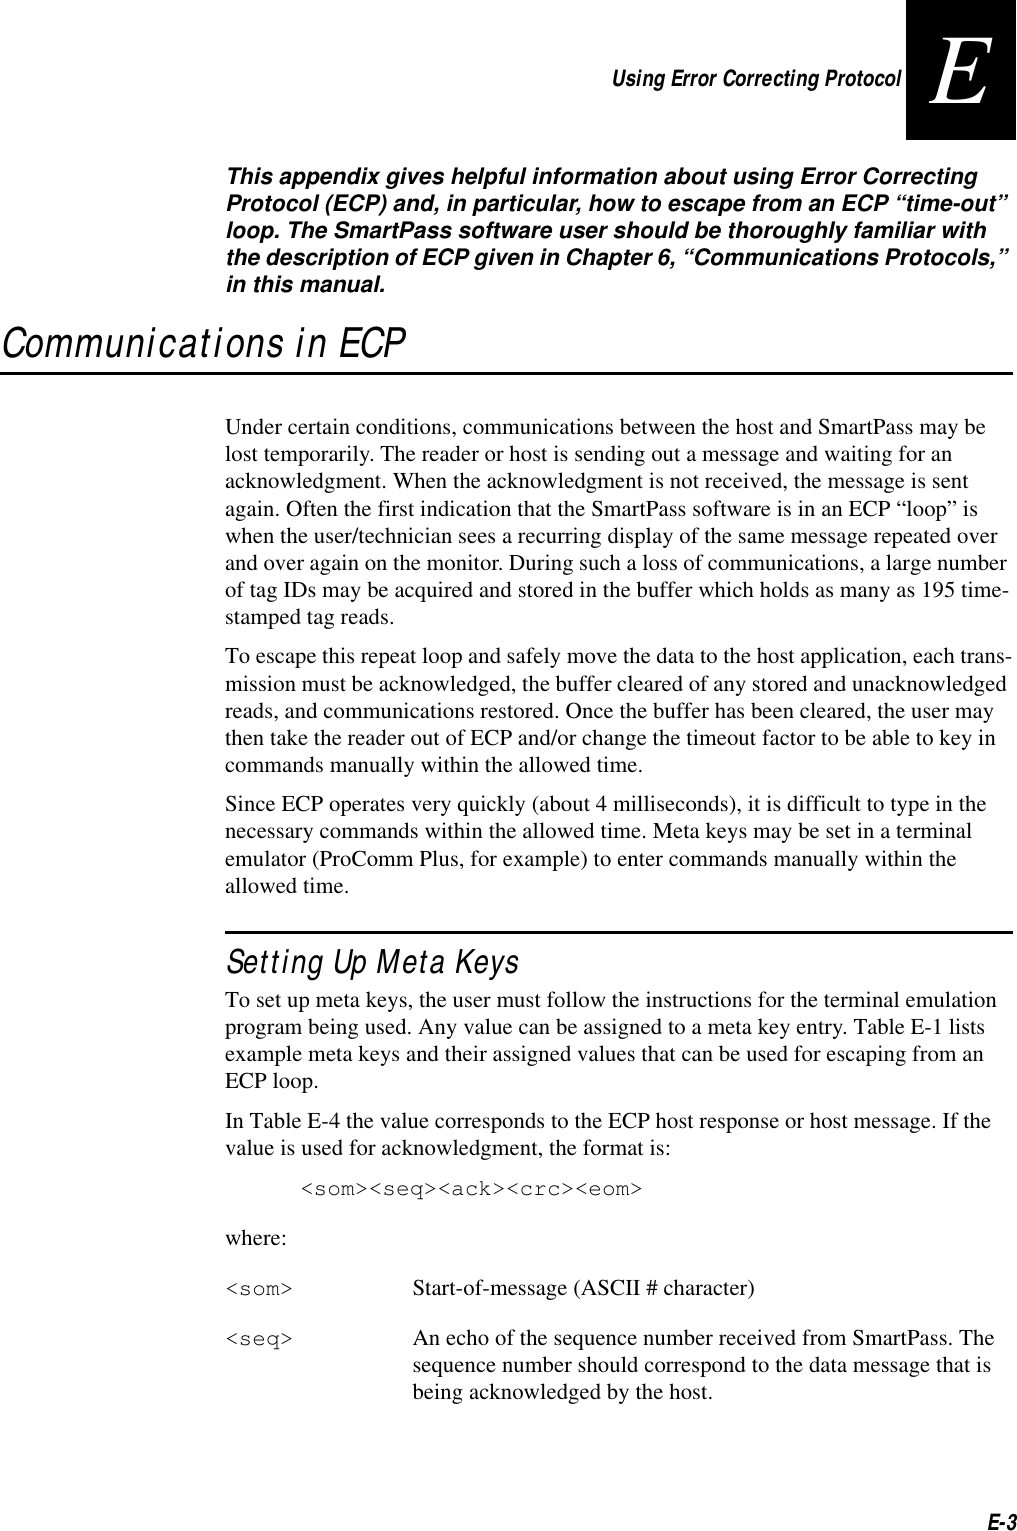 Using Error Correcting ProtocolE-3EThis appendix gives helpful information about using Error Correcting Protocol (ECP) and, in particular, how to escape from an ECP “time-out” loop. The SmartPass software user should be thoroughly familiar with the description of ECP given in Chapter 6, “Communications Protocols,” in this manual.Communications in ECPUnder certain conditions, communications between the host and SmartPass may be lost temporarily. The reader or host is sending out a message and waiting for an acknowledgment. When the acknowledgment is not received, the message is sent again. Often the first indication that the SmartPass software is in an ECP “loop” is when the user/technician sees a recurring display of the same message repeated over and over again on the monitor. During such a loss of communications, a large number of tag IDs may be acquired and stored in the buffer which holds as many as 195 time-stamped tag reads. To escape this repeat loop and safely move the data to the host application, each trans-mission must be acknowledged, the buffer cleared of any stored and unacknowledged reads, and communications restored. Once the buffer has been cleared, the user may then take the reader out of ECP and/or change the timeout factor to be able to key in commands manually within the allowed time. Since ECP operates very quickly (about 4 milliseconds), it is difficult to type in the necessary commands within the allowed time. Meta keys may be set in a terminal emulator (ProComm Plus, for example) to enter commands manually within the allowed time.Setting Up Meta KeysTo set up meta keys, the user must follow the instructions for the terminal emulation program being used. Any value can be assigned to a meta key entry. Table E-1 lists example meta keys and their assigned values that can be used for escaping from an ECP loop.In Table E-4 the value corresponds to the ECP host response or host message. If the value is used for acknowledgment, the format is:&lt;som&gt;&lt;seq&gt;&lt;ack&gt;&lt;crc&gt;&lt;eom&gt;where:&lt;som&gt; Start-of-message (ASCII # character)&lt;seq&gt; An echo of the sequence number received from SmartPass. The sequence number should correspond to the data message that is being acknowledged by the host.